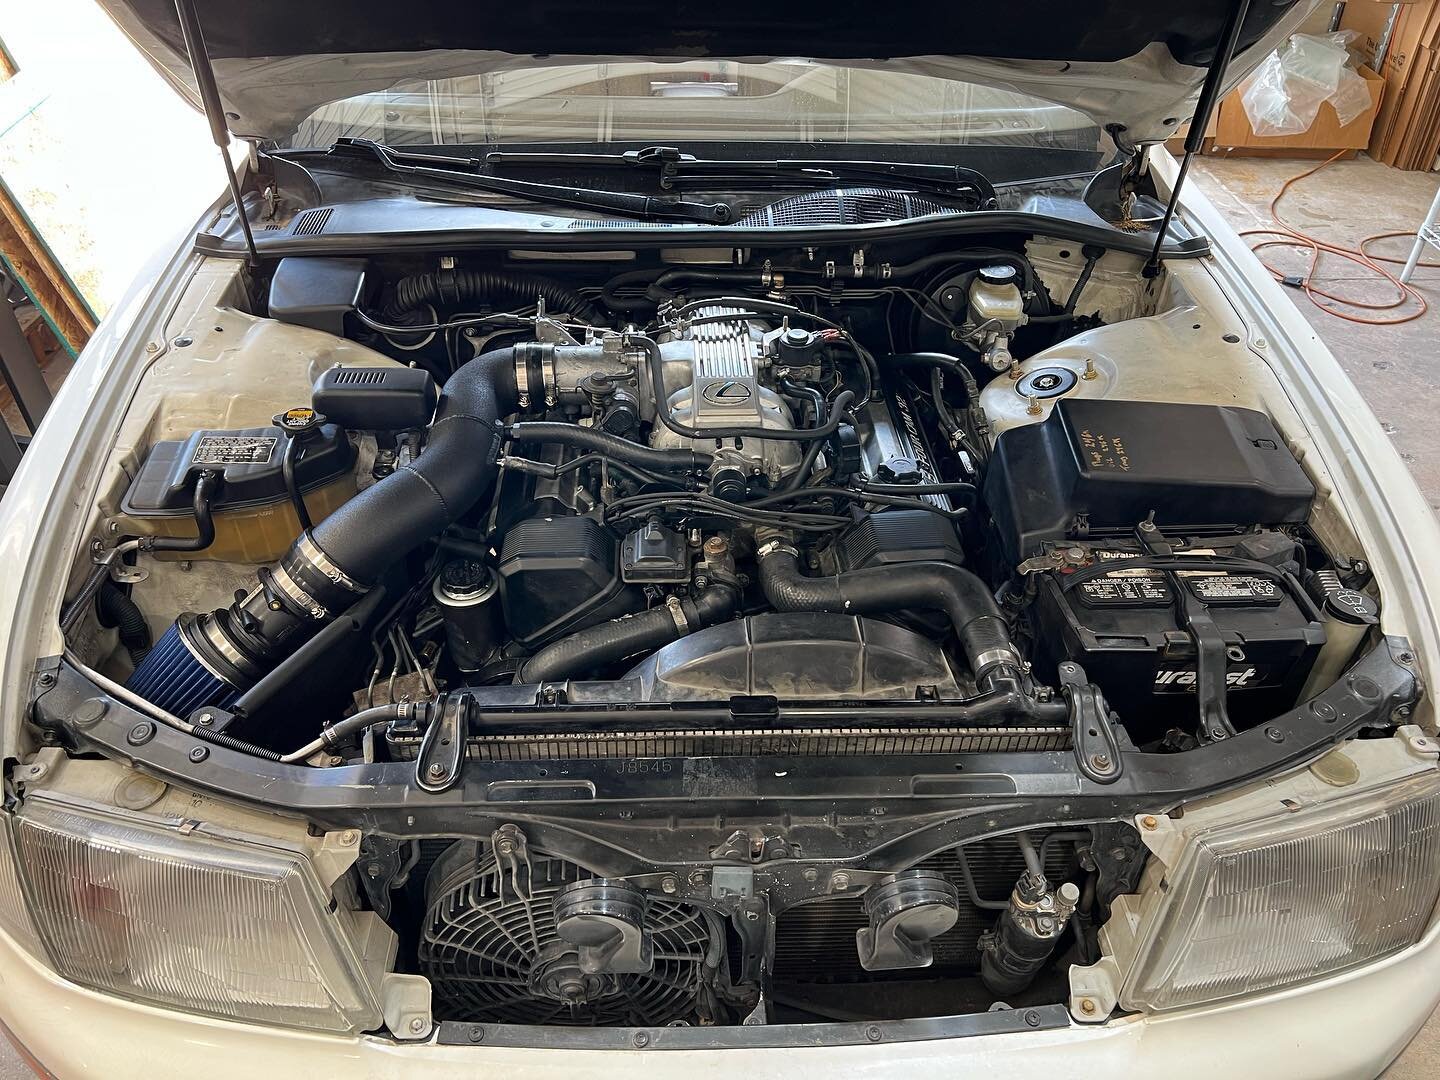 ⚠️NEW PRODUCT RELEASE⚠️

We are now offering a cold air intake setup for 95-97 LS400 non-VVTi models after a long awaited development period.

We are finalizing gathering all of our test data to be released in a YouTube video, but the initial results